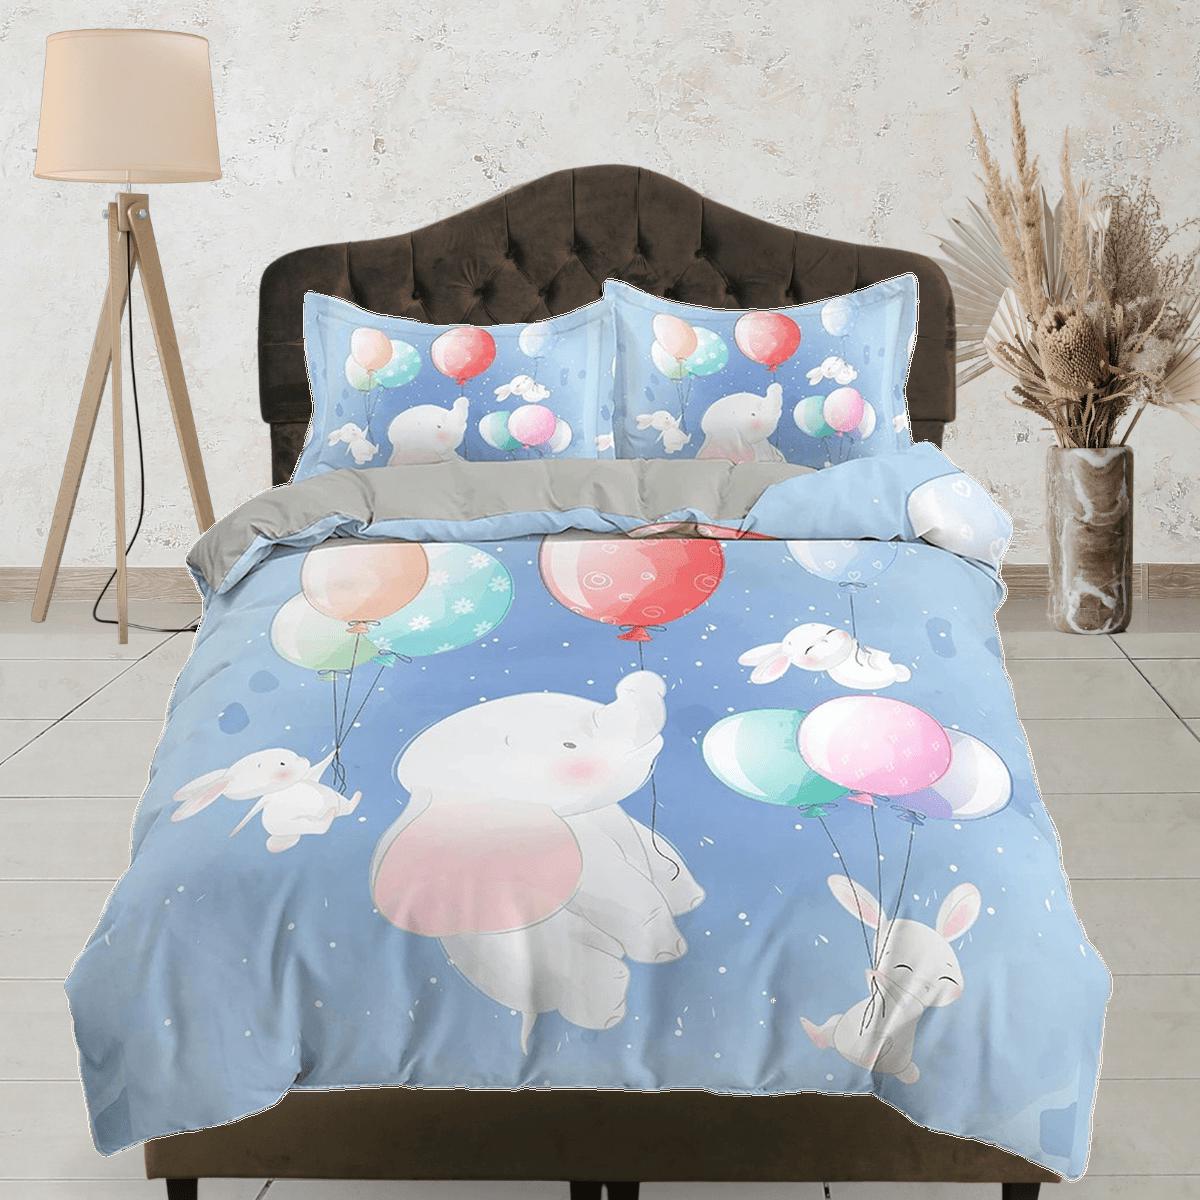 daintyduvet Flying elephant and bunny cute toddler bedding, unique duvet cover for nursery kids, crib bedding, baby zipper bedding, king queen full twin